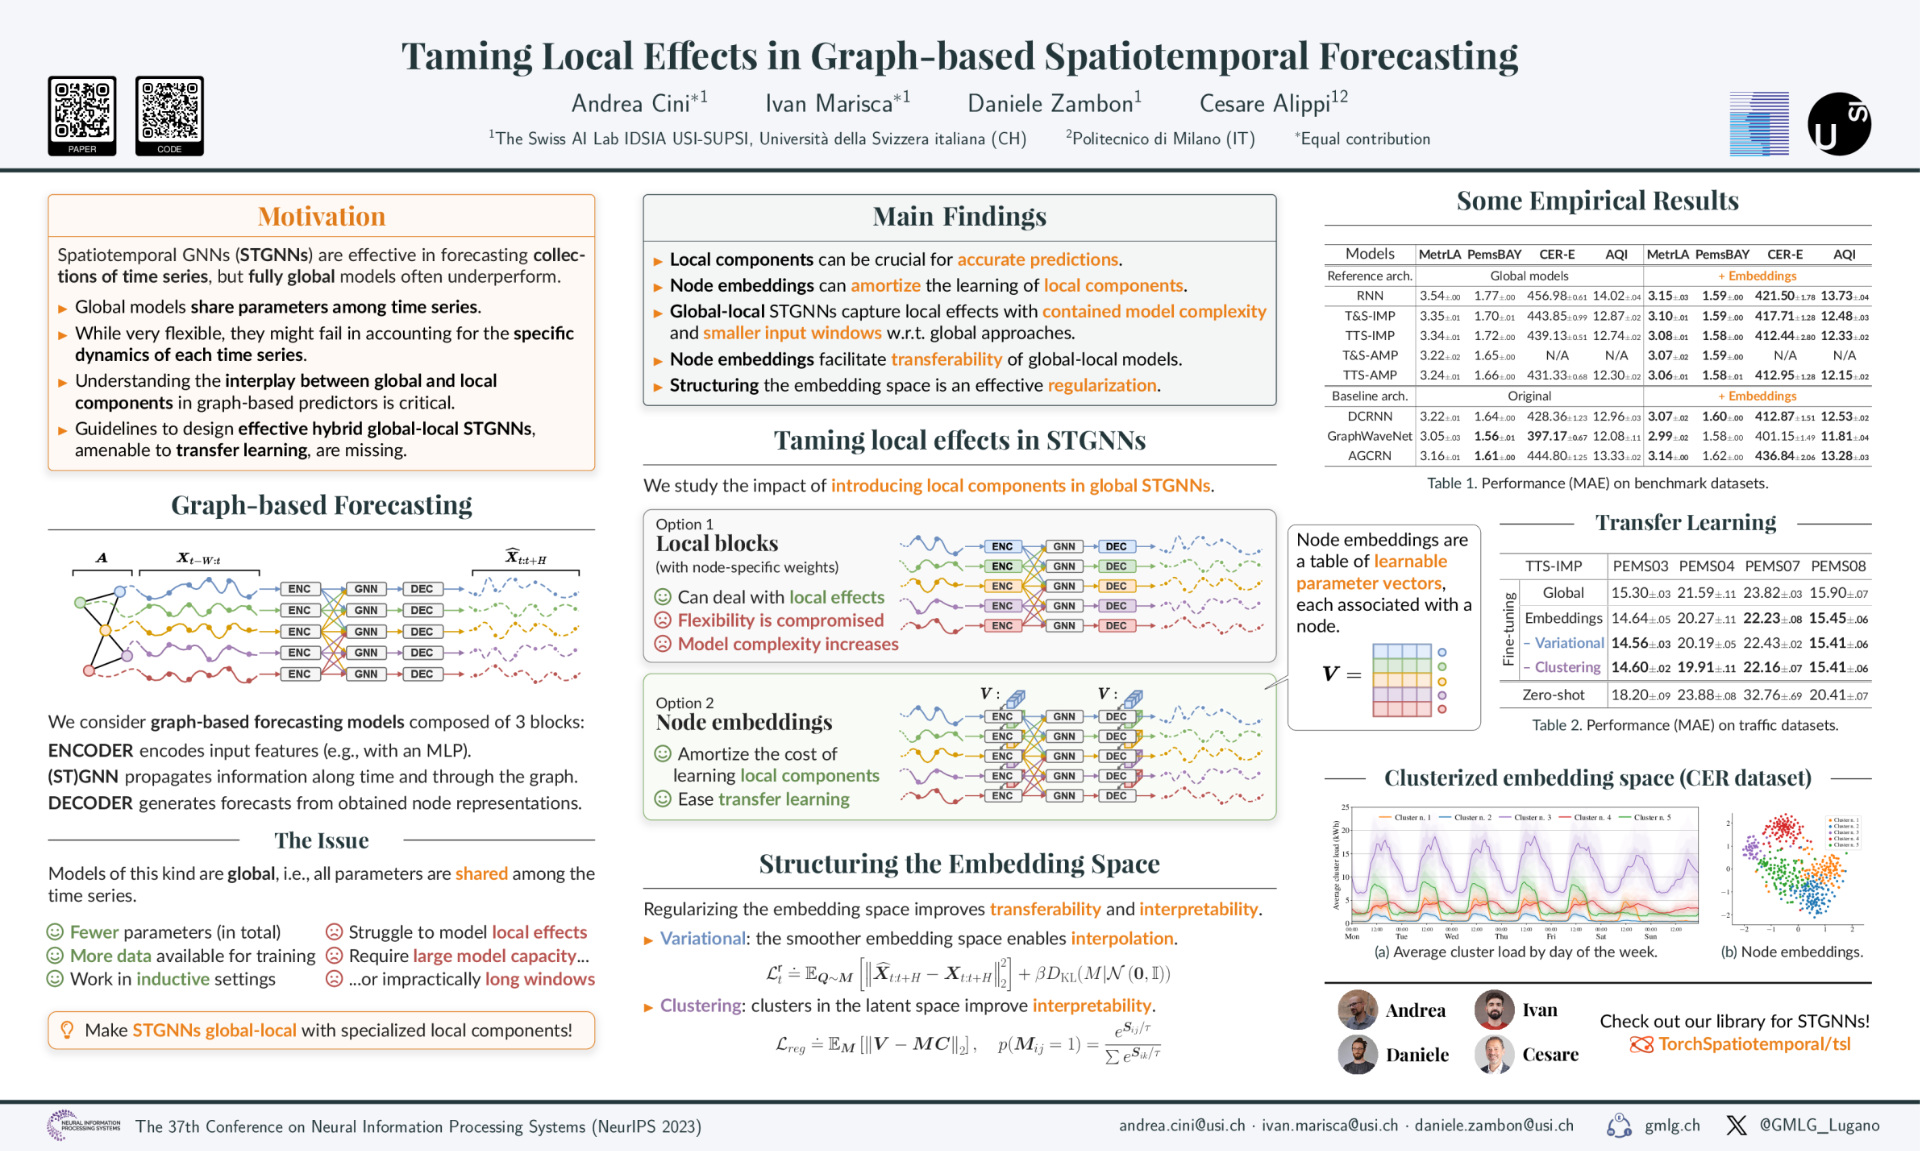 Poster of "Taming Local Effects in Graph-based Spatiotemporal Forecasting" (NeurIPS 2023).